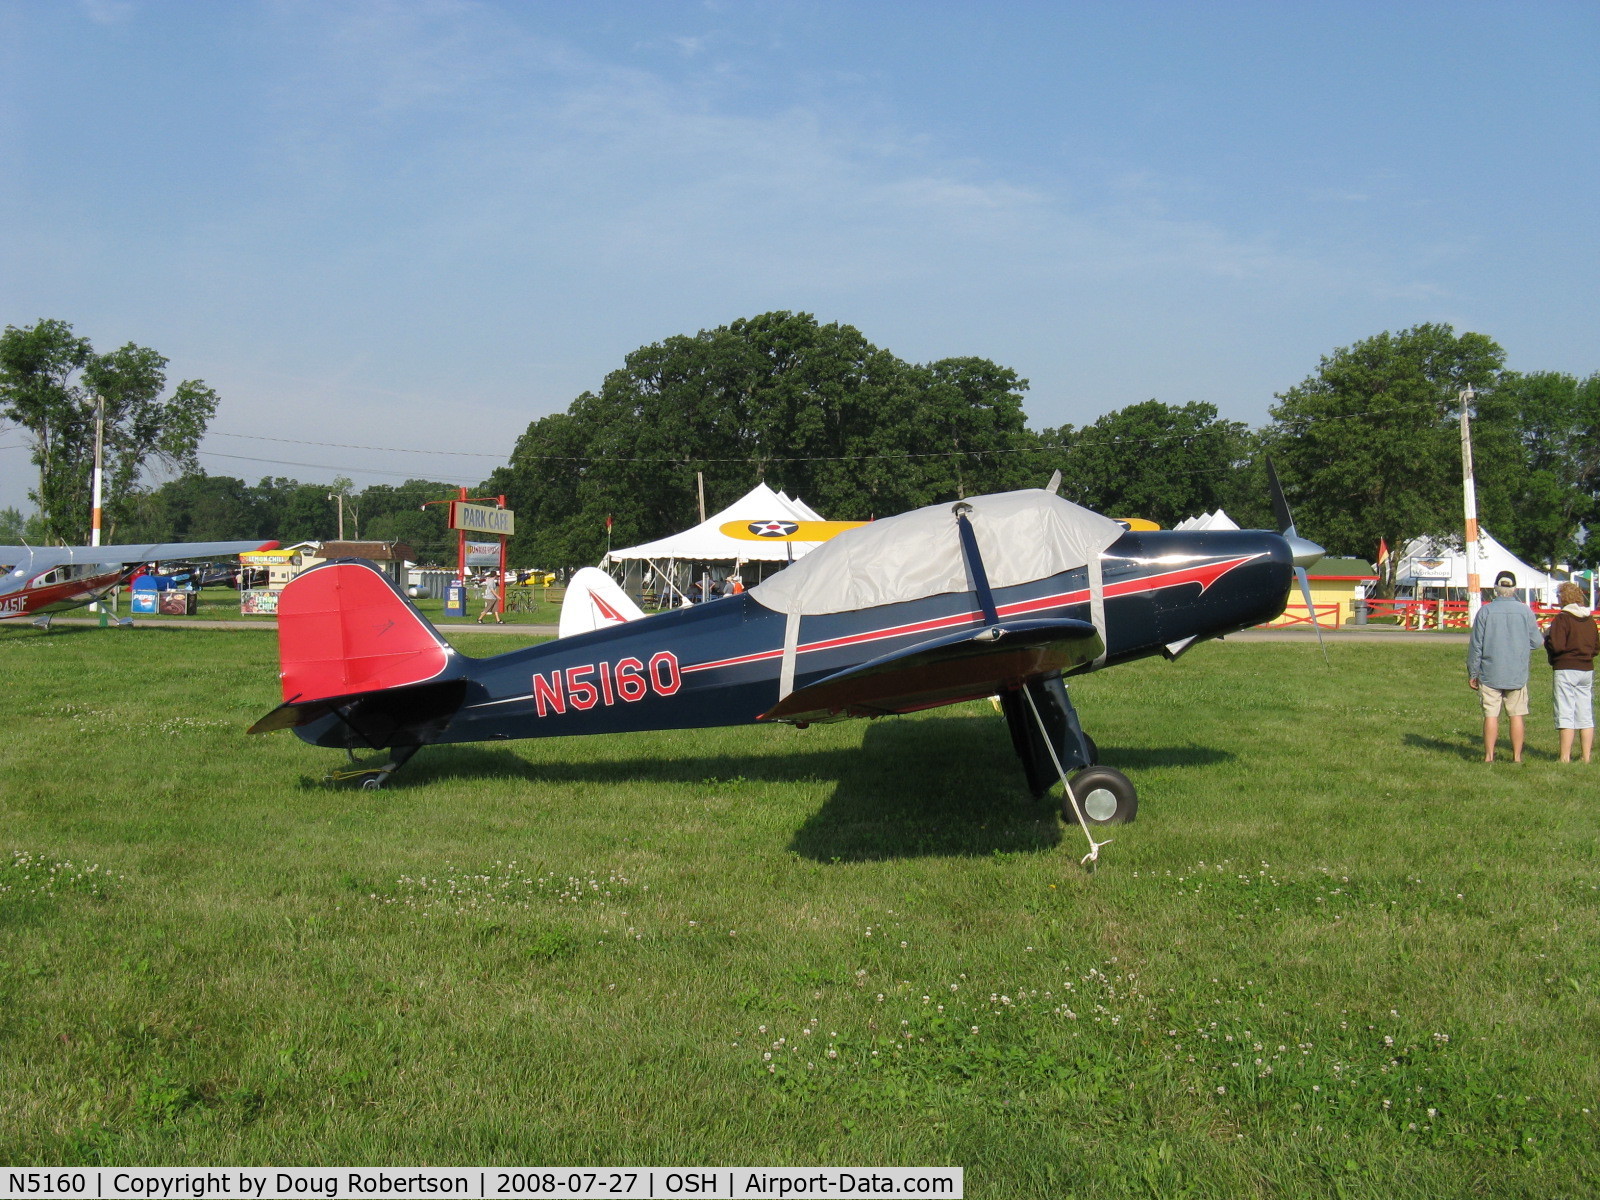 N5160, 1952 Rawdon T1 C/N T1-6, 1952 Rawdon Brothers Aircraft T1 trainer, Lycoming O-320 150 Hp, originally a rare production aircraft but now registered Experimental. EAA 2008 Classic Preservation Award winner.